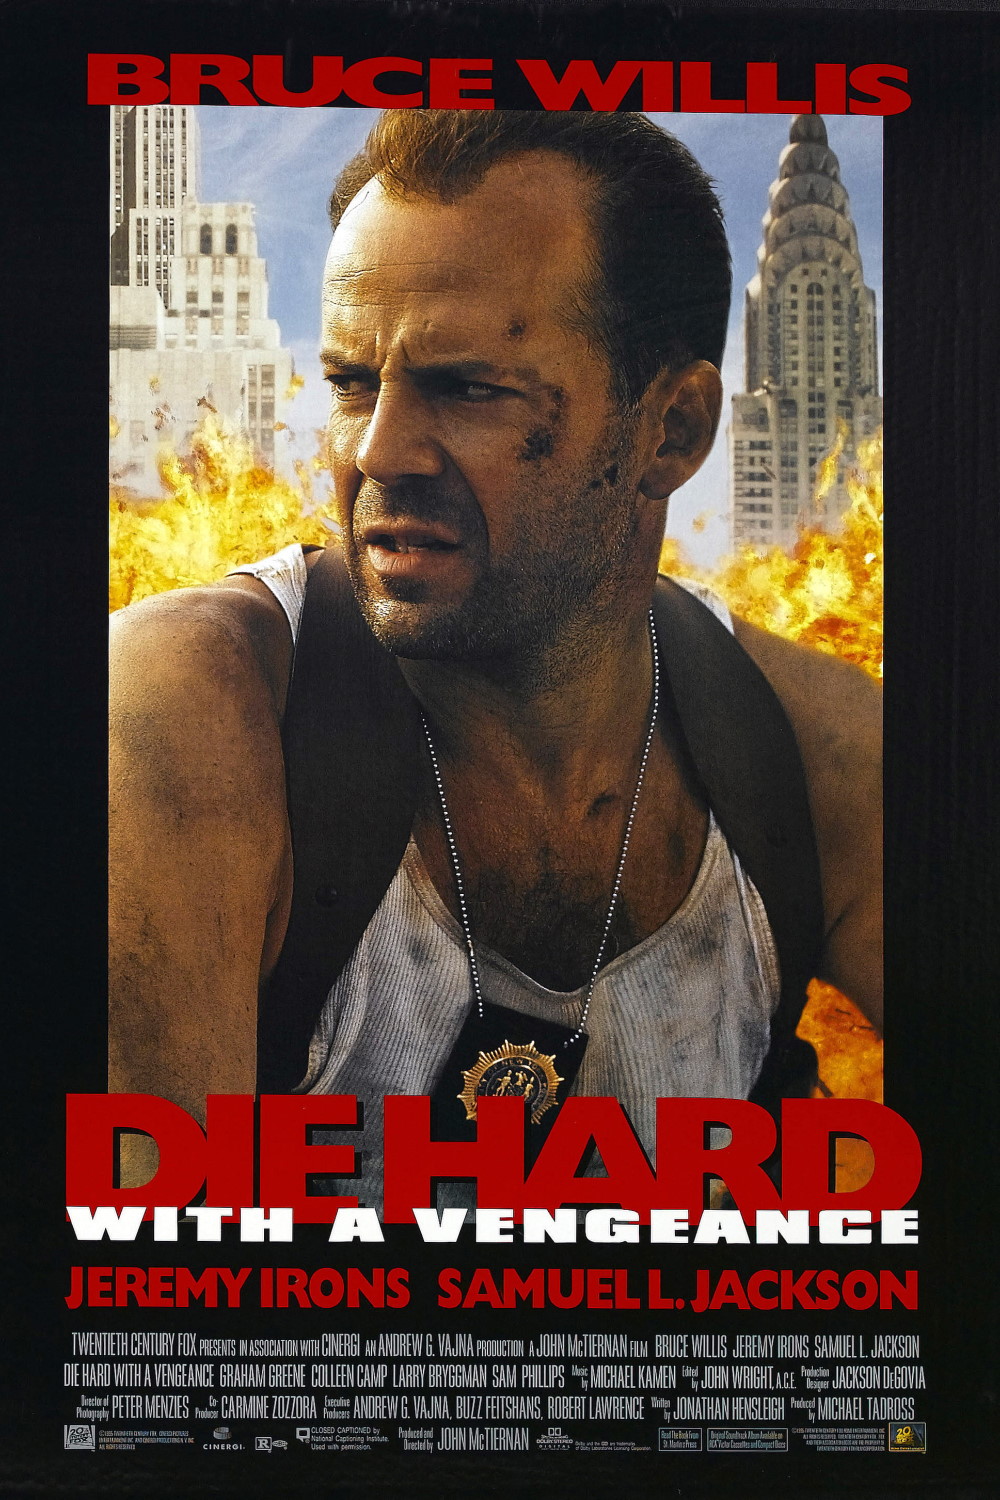 Die Hard with a Vengeance (1995) Poster